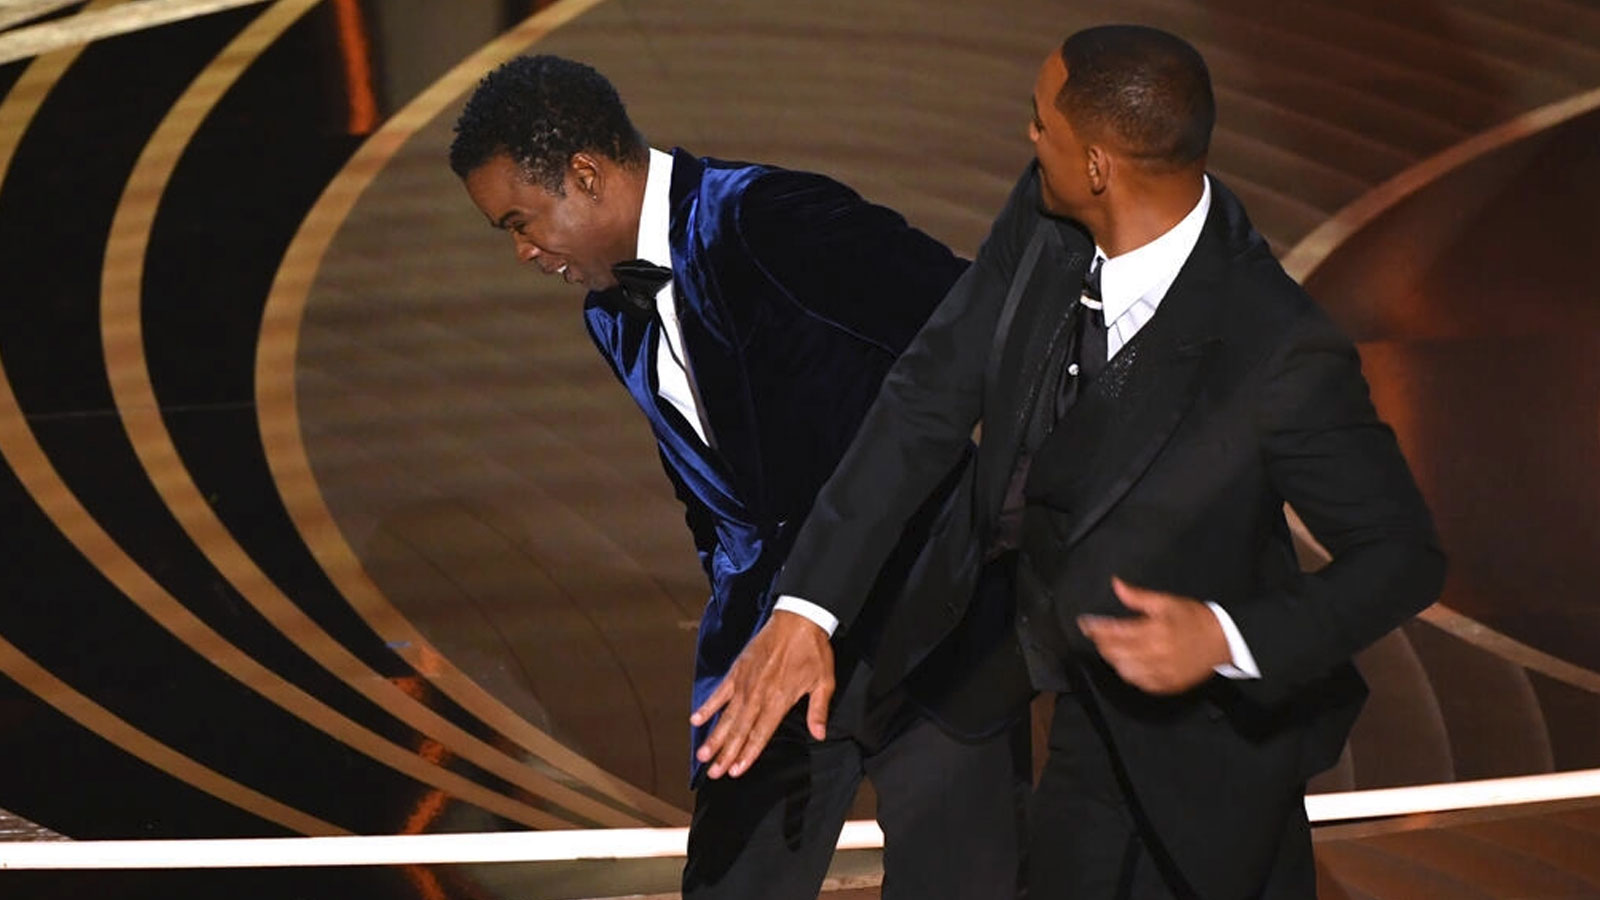 US actor Will Smith (right) approaches US actor Chris Rock, and slaps him onstage, during the 94th Oscars at the Dolby Theatre in Hollywood, California